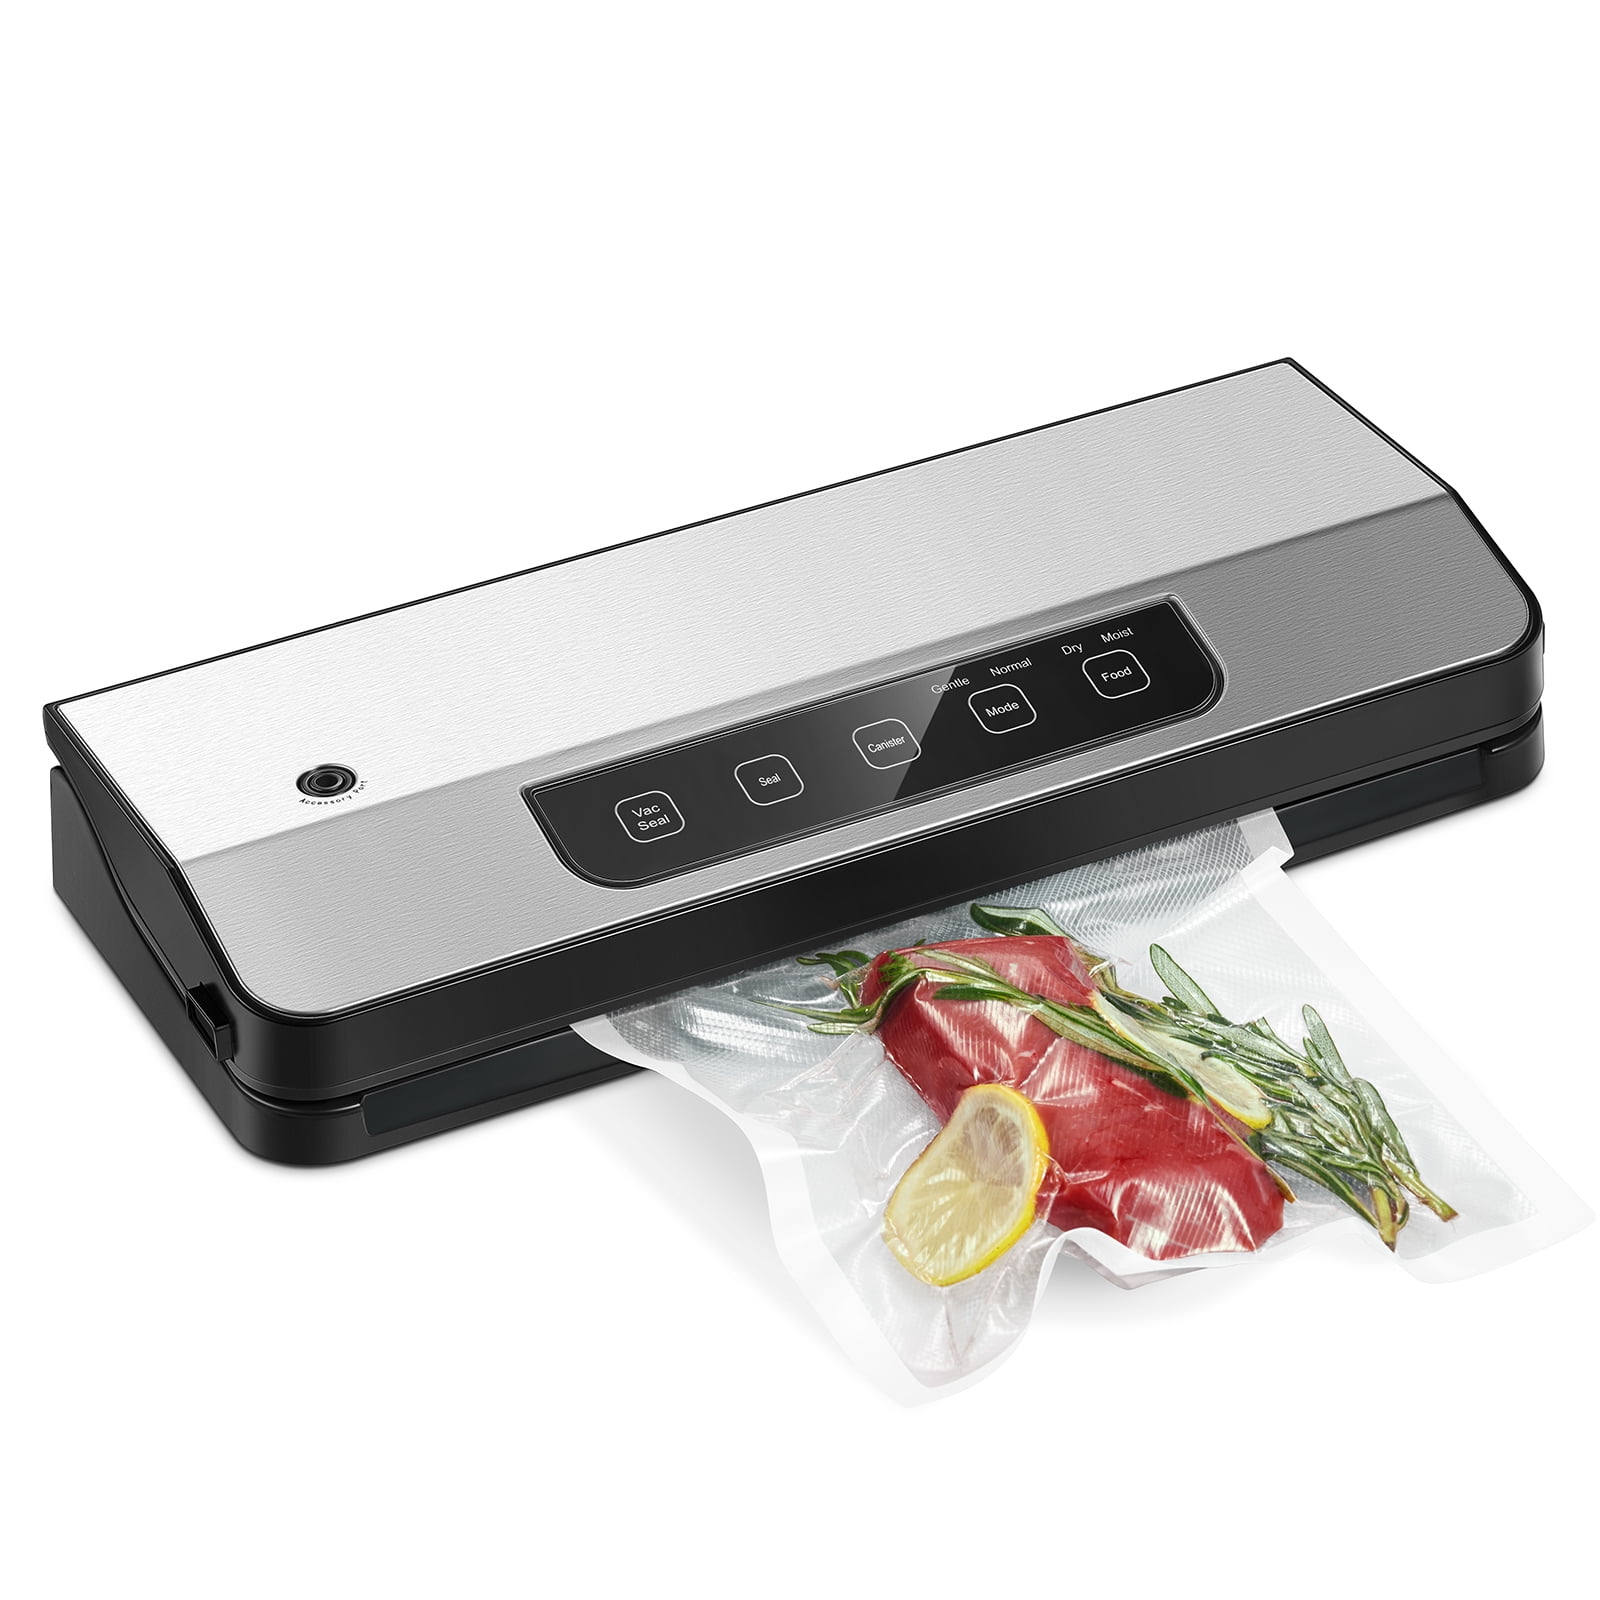 70% OFF Inkbird Food Vacuum Sealer Packaging Machine 220V Strong Suction  Packer with 5Pcs Bags for Food Saver Preservation